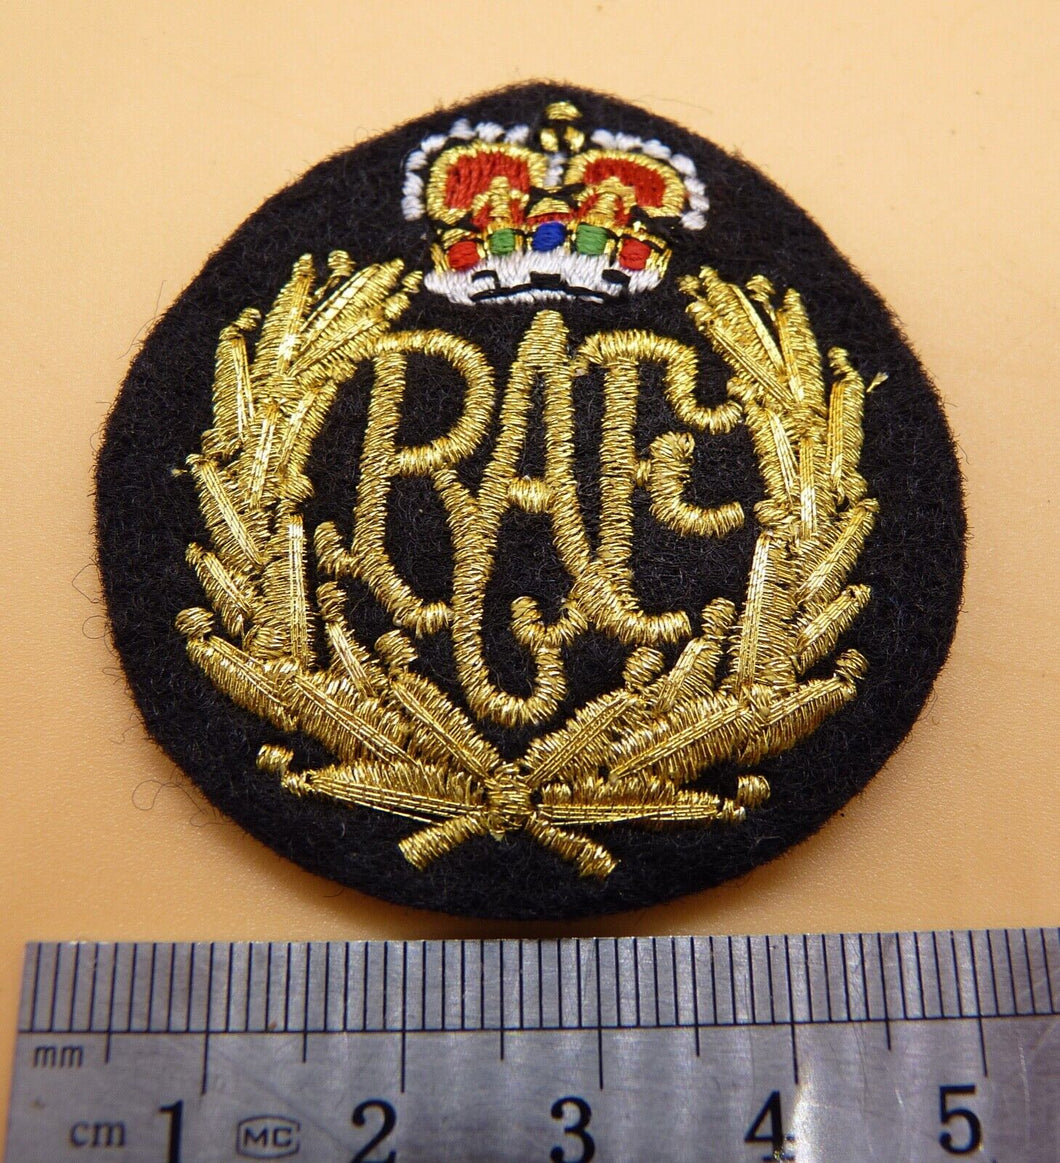 RAF QC - Royal Air Force current issue padded cap badge. Brand new and unissued.